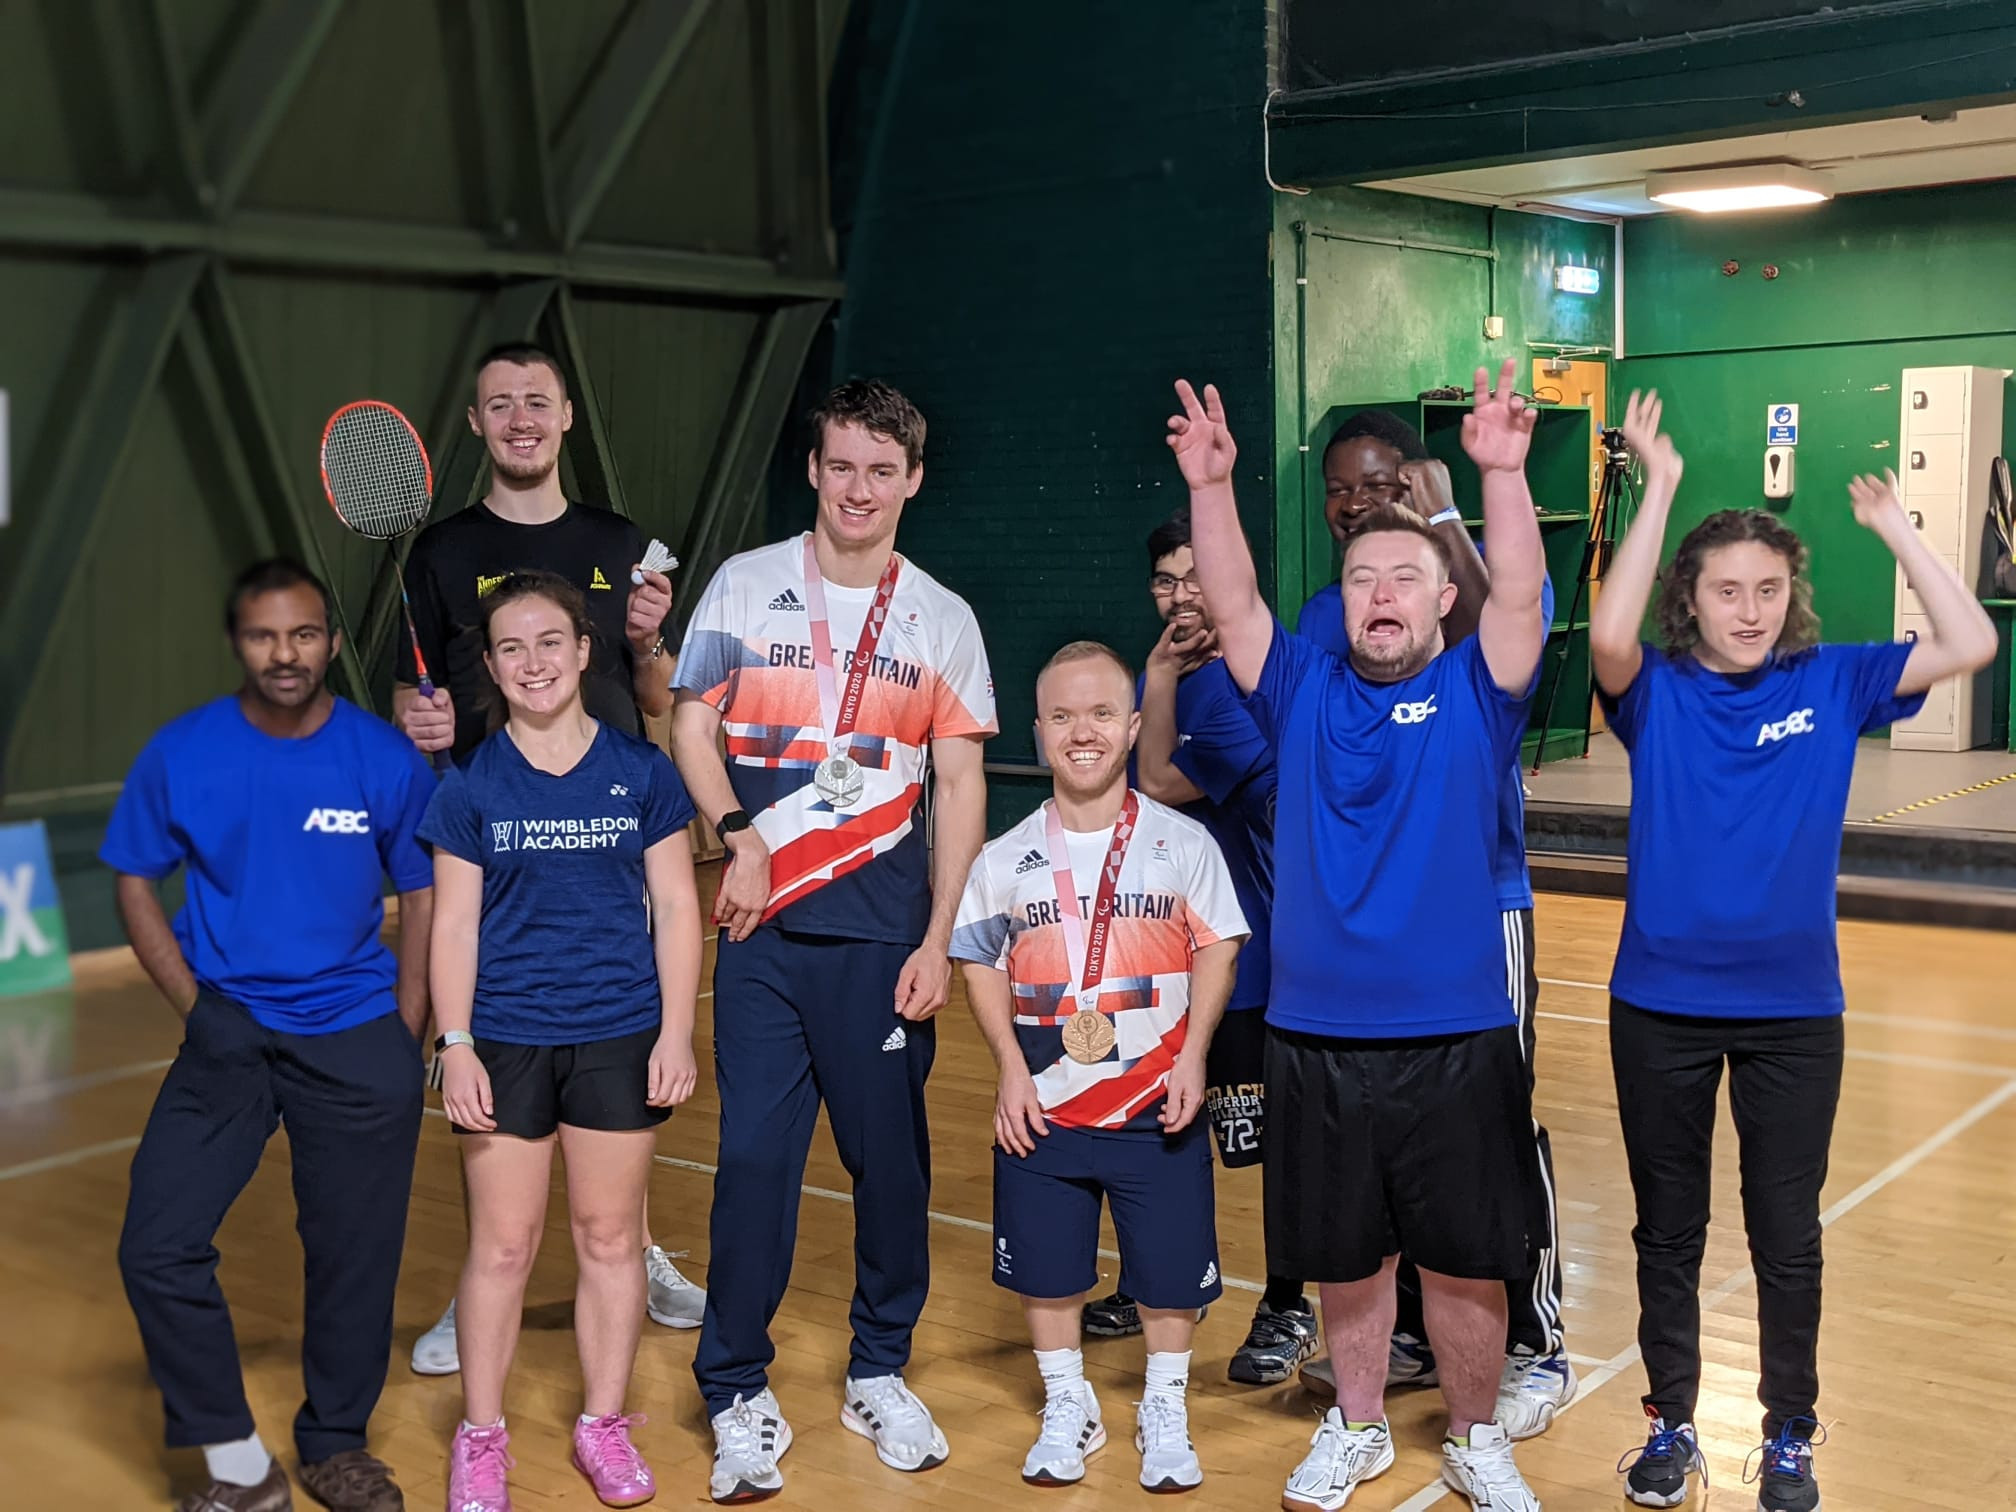 Paralympic medallists Dan Bethell and Krysten Coombs visited a disabled group in Wimbledon ©Badminton England